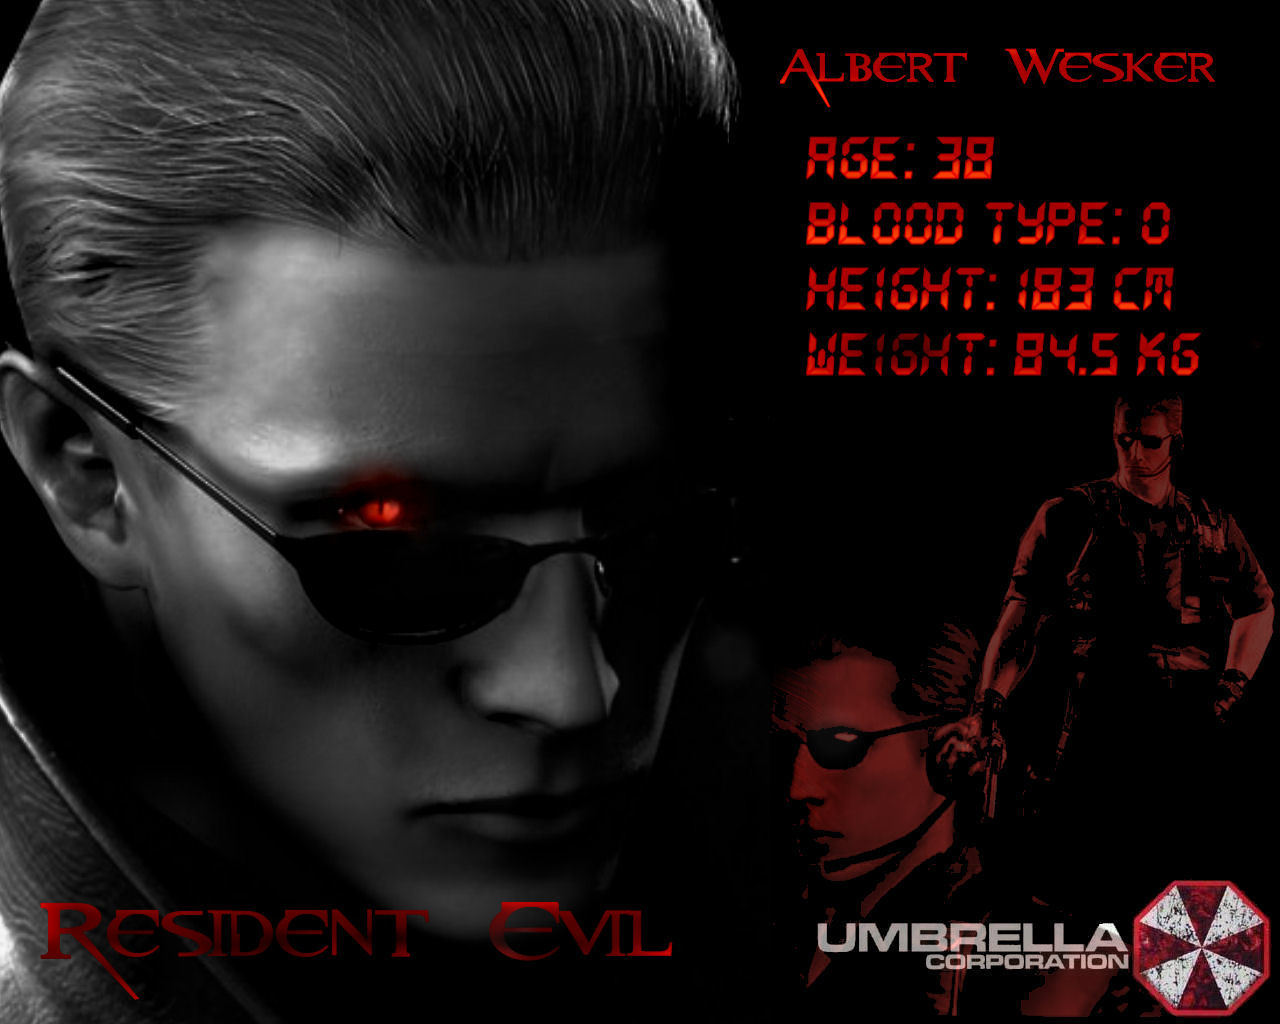 Albert Wesker Image HD Wallpaper And Background